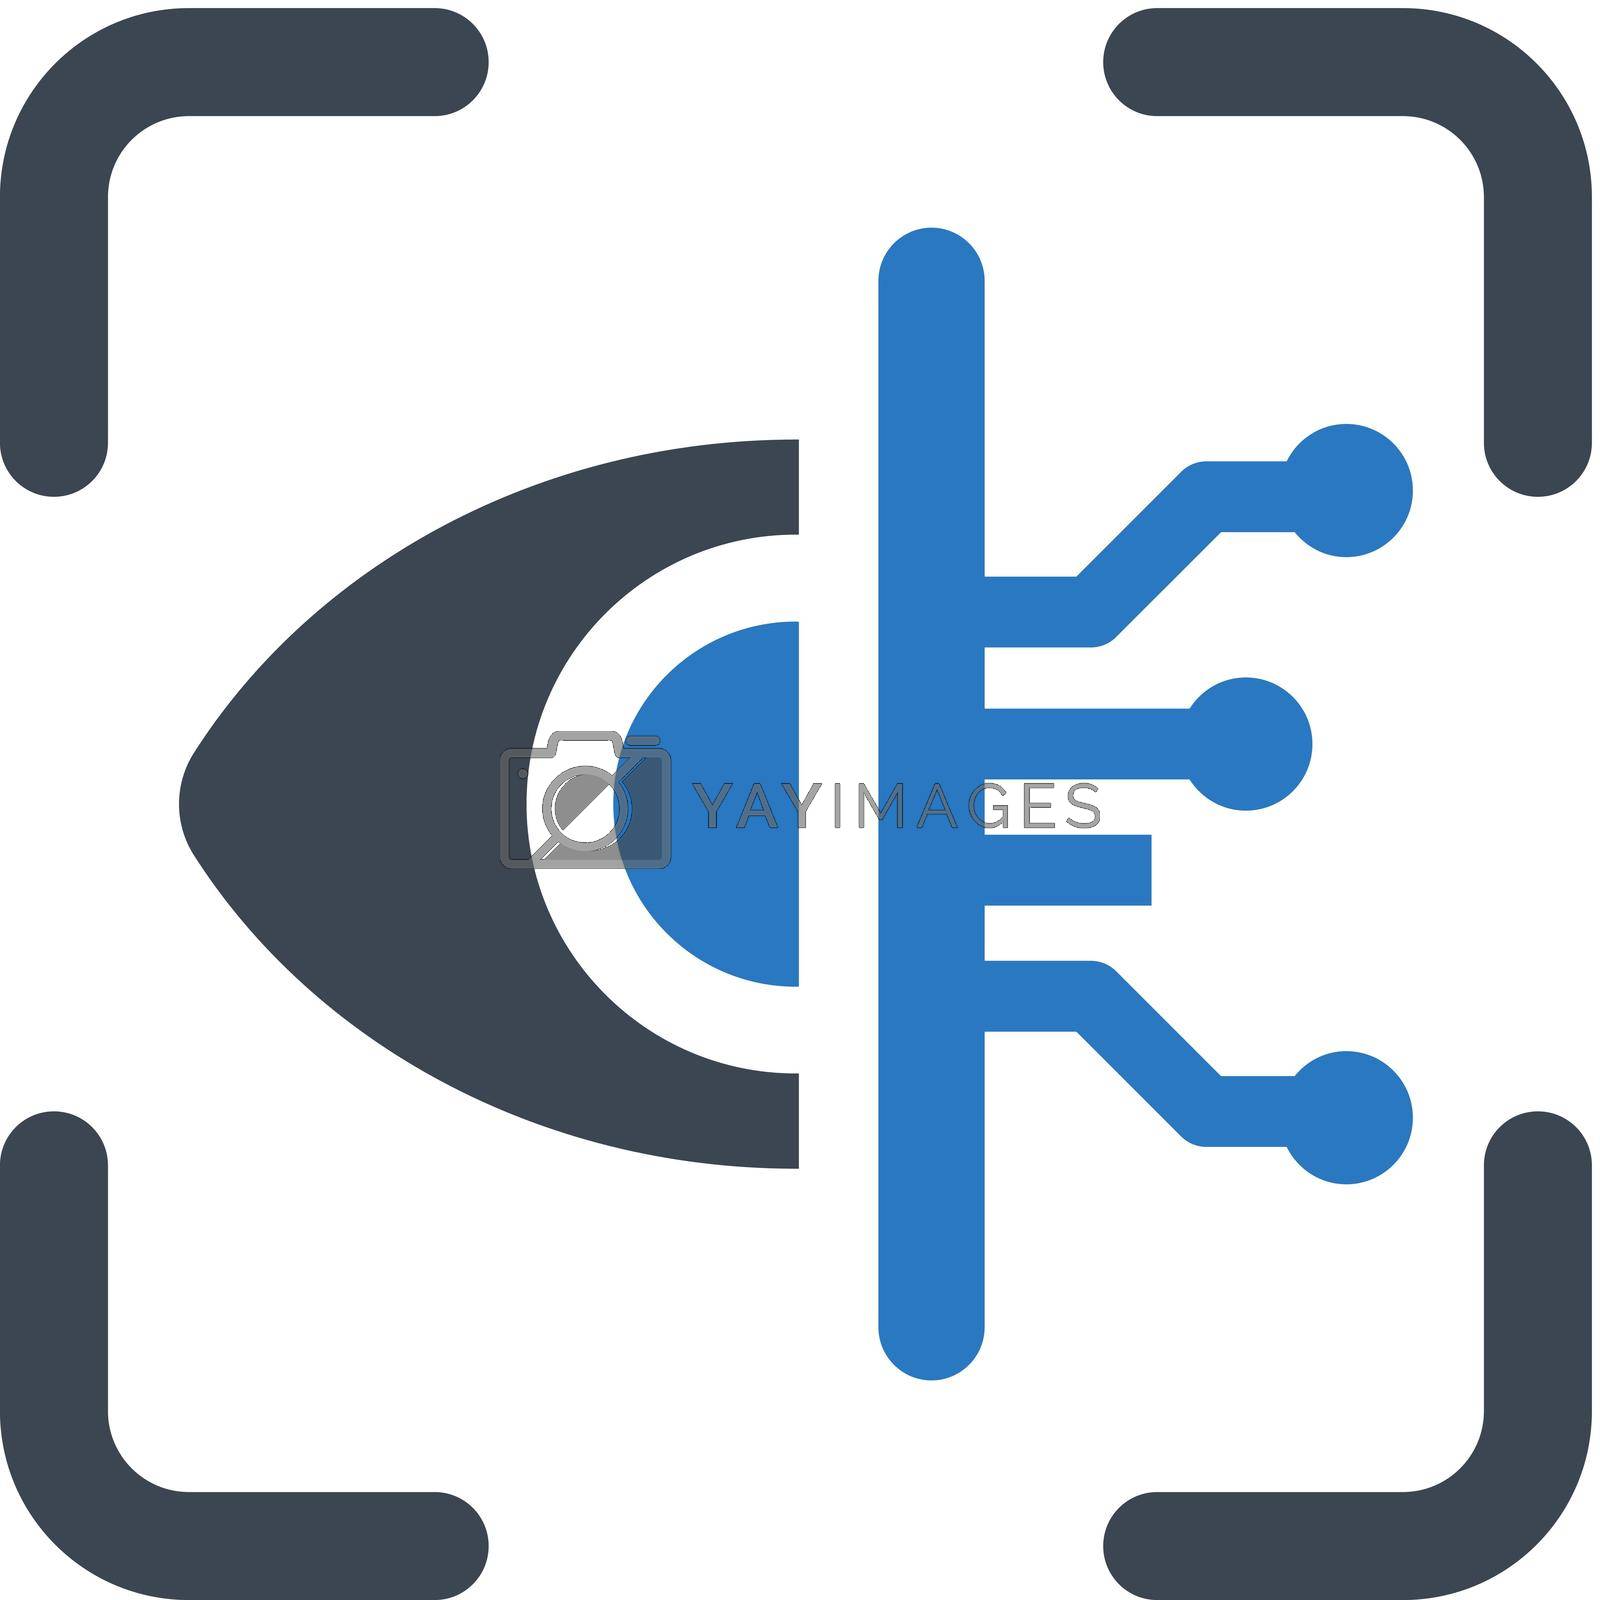 Royalty free image of Retina scanning icon by delwar018